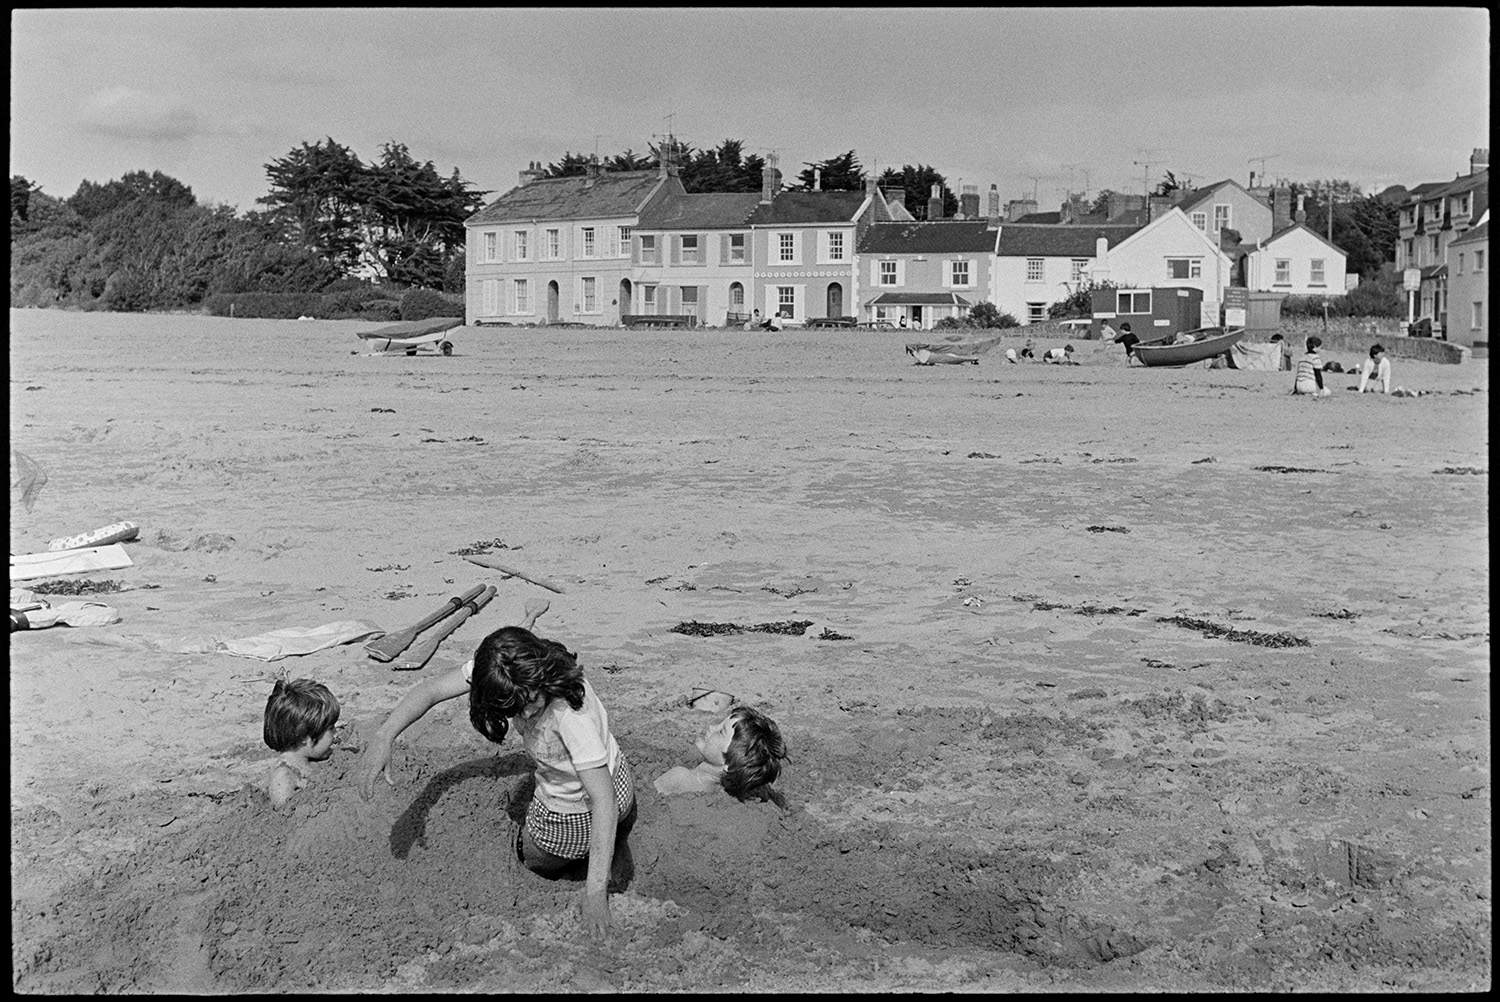 Children playing on beach, kite. Abandoned barge. 
[Children playing on the beach at Instow. They are burying themselves in the sand. Buildings and boats on the seafront are visible in the background.]